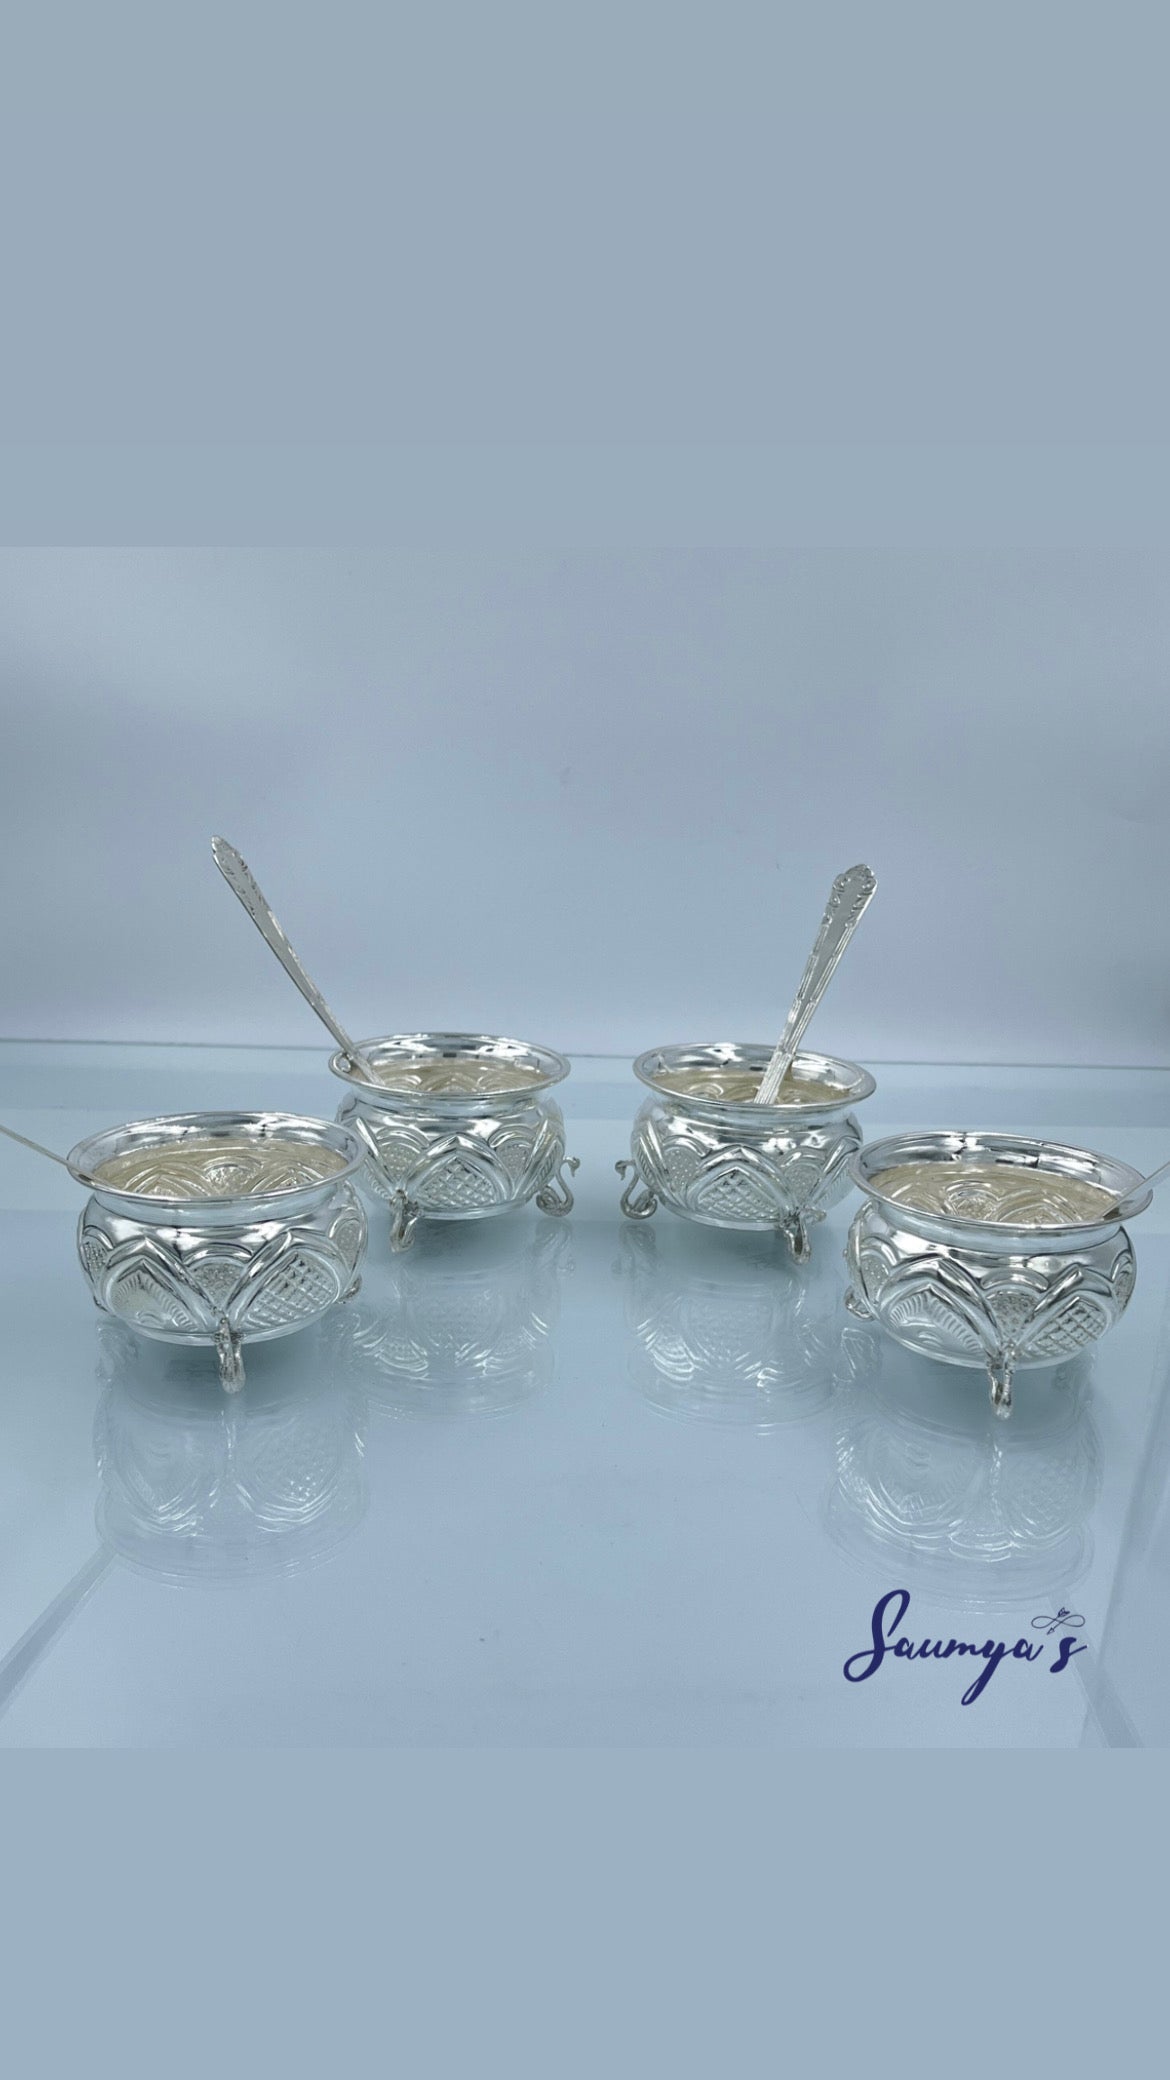 Beautiful Hand Crafted Peacock Design Bowls Set of 4! Crafted in pure silver